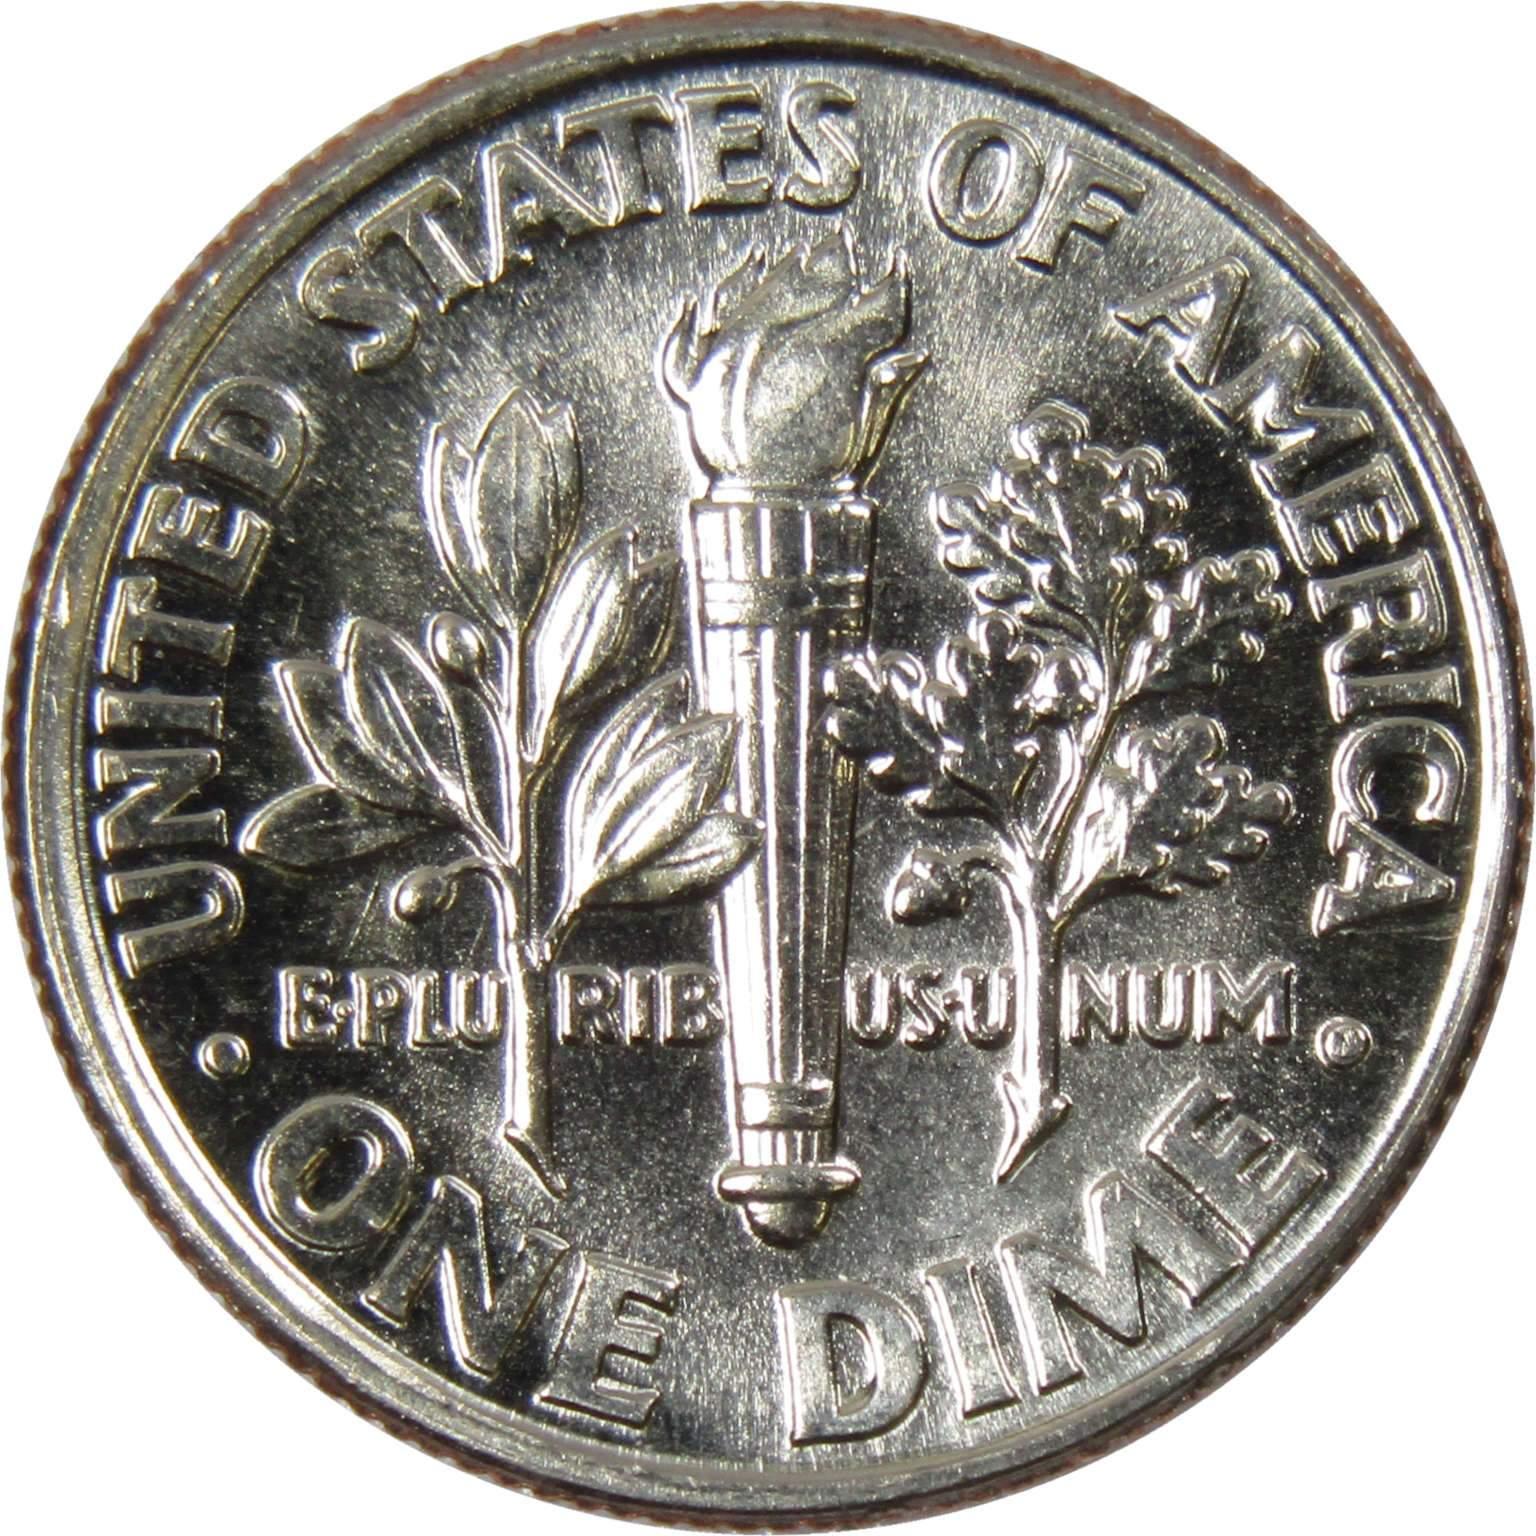 1996 D Roosevelt Dime BU Uncirculated Mint State 10c US Coin Collectible